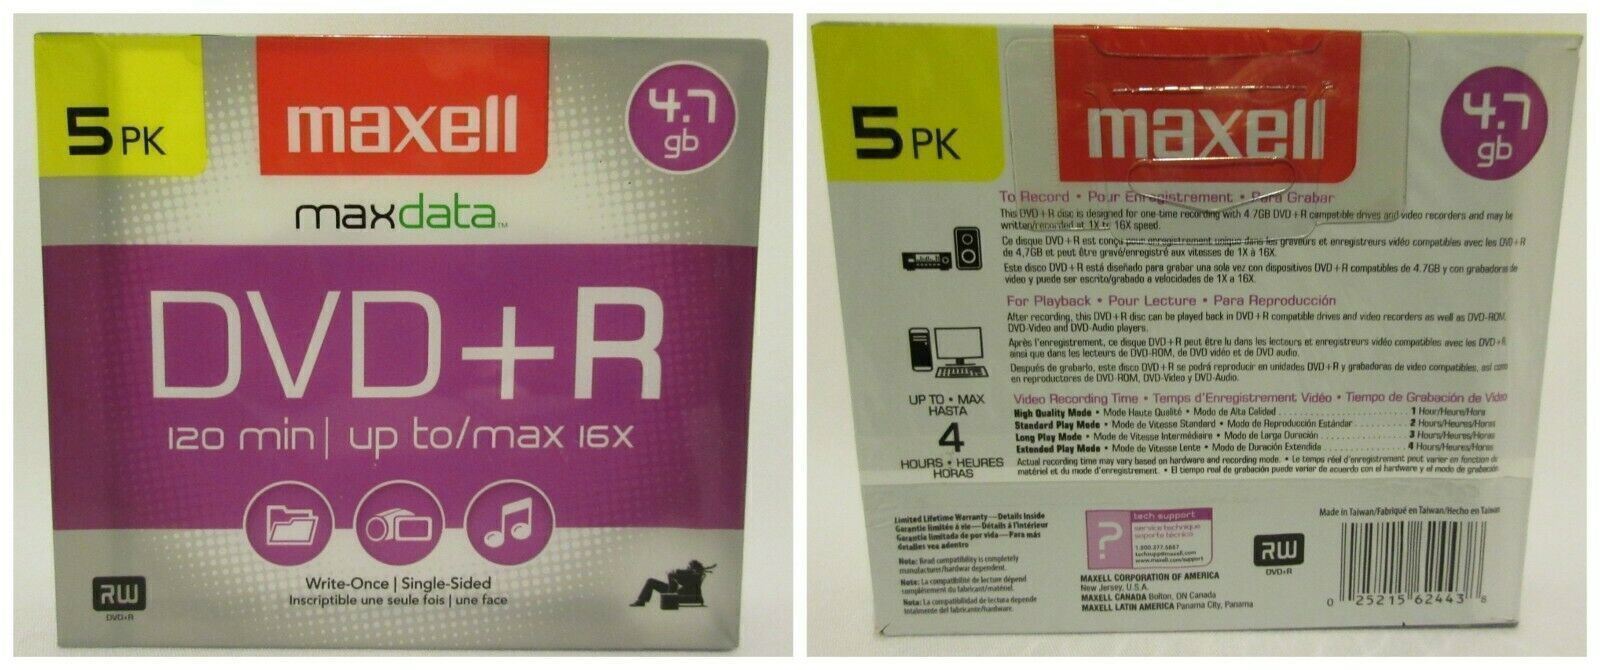 MAXELL MAX DATA DVD+R 120 MIN. UP TO/MAX 16X UP TO 4 HRS 4.7GB SINGLE SIDED 5 PK